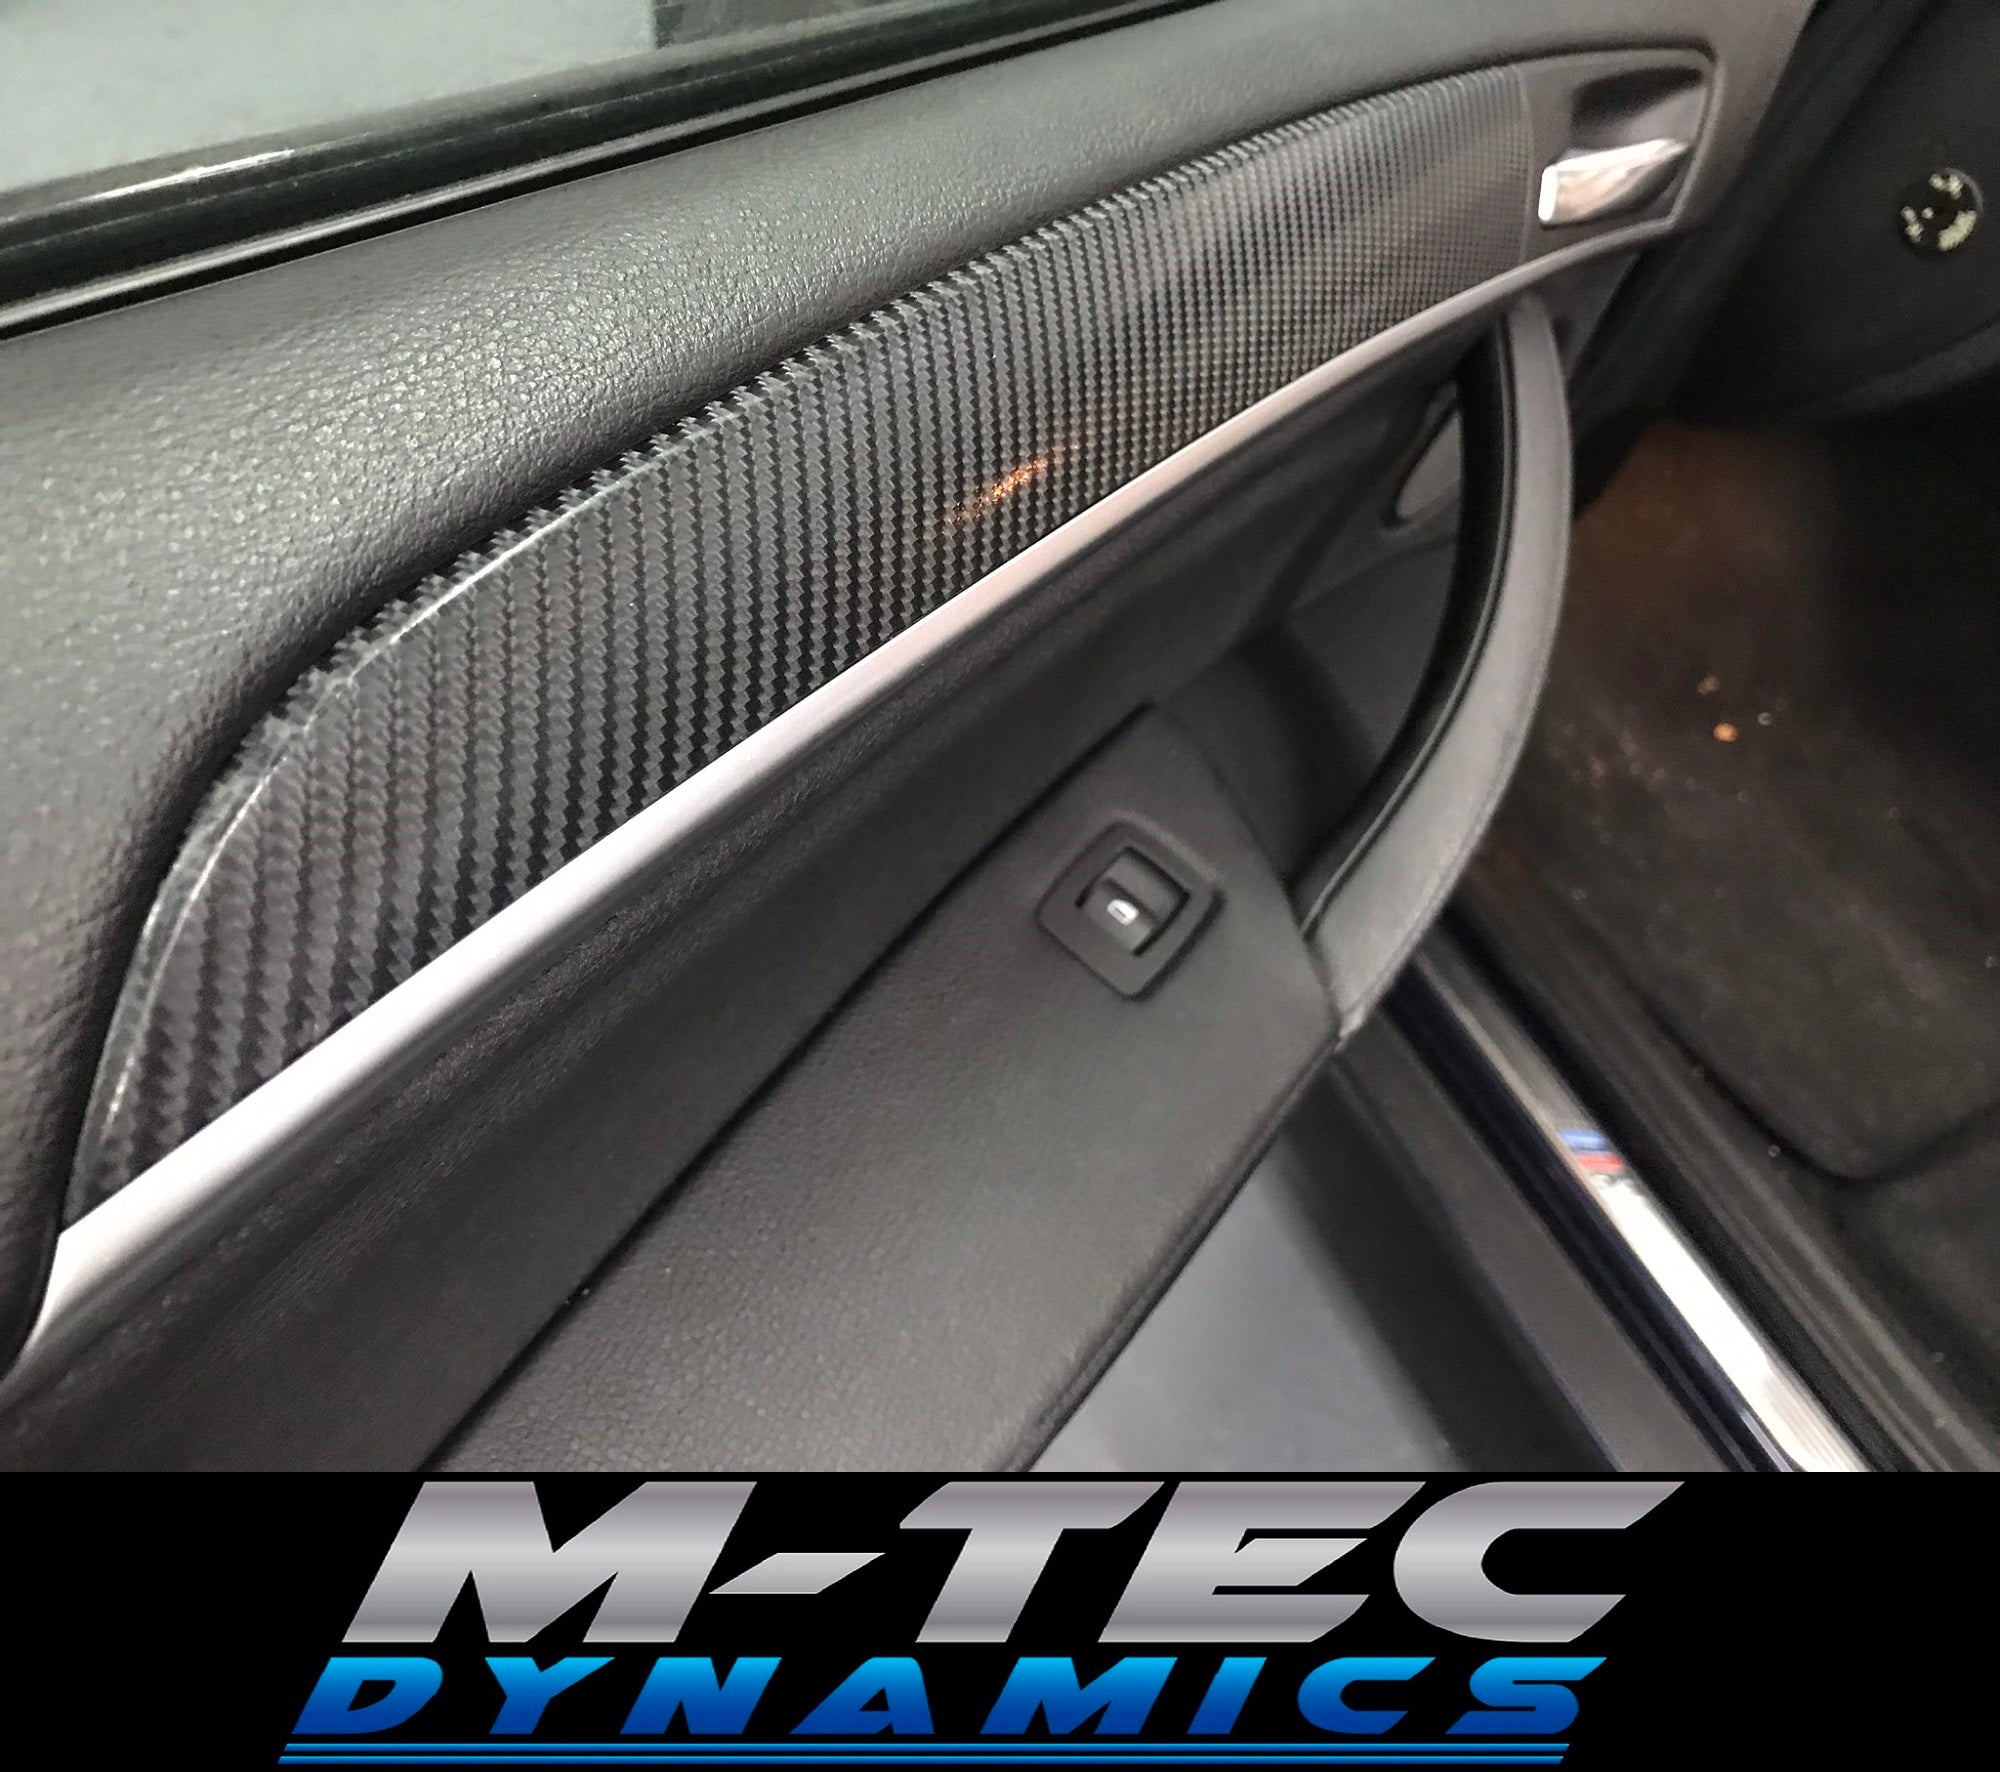 BMW X5 E70 / X6 E71 DOOR CARD REMOVAL - OPTIONAL SERVICE - INTERIOR TRIM SET WRAPPING SERVICE - SEE DETAILS